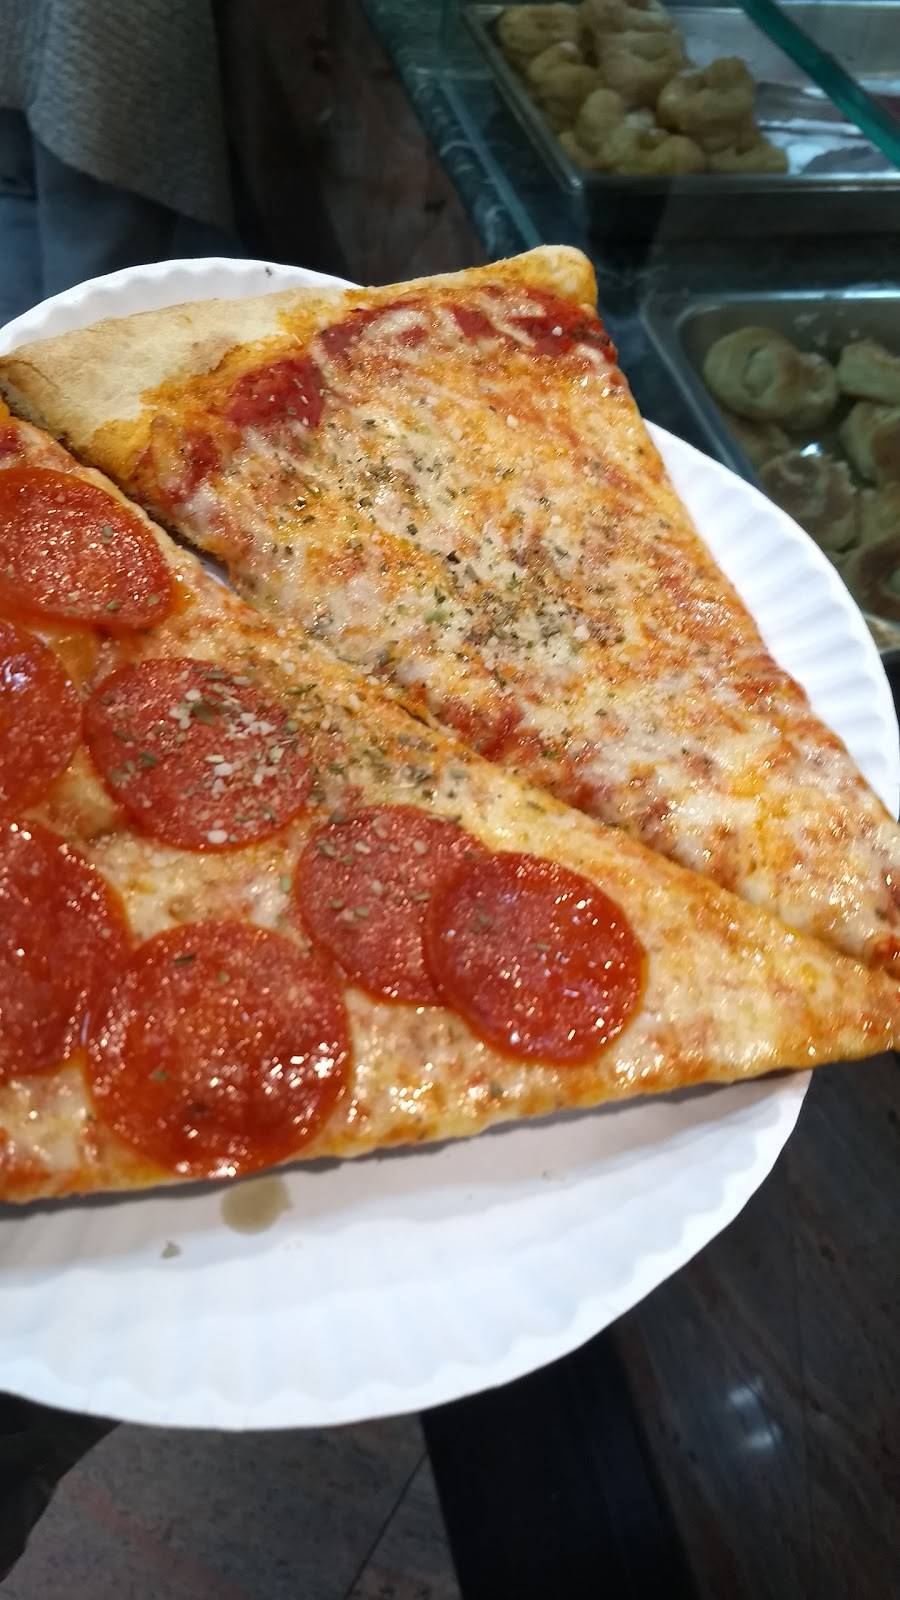 Corato I Pizza | meal delivery | 66-94 Fresh Pond Rd, Ridgewood, NY 11385, USA | 7184976177 OR +1 718-497-6177